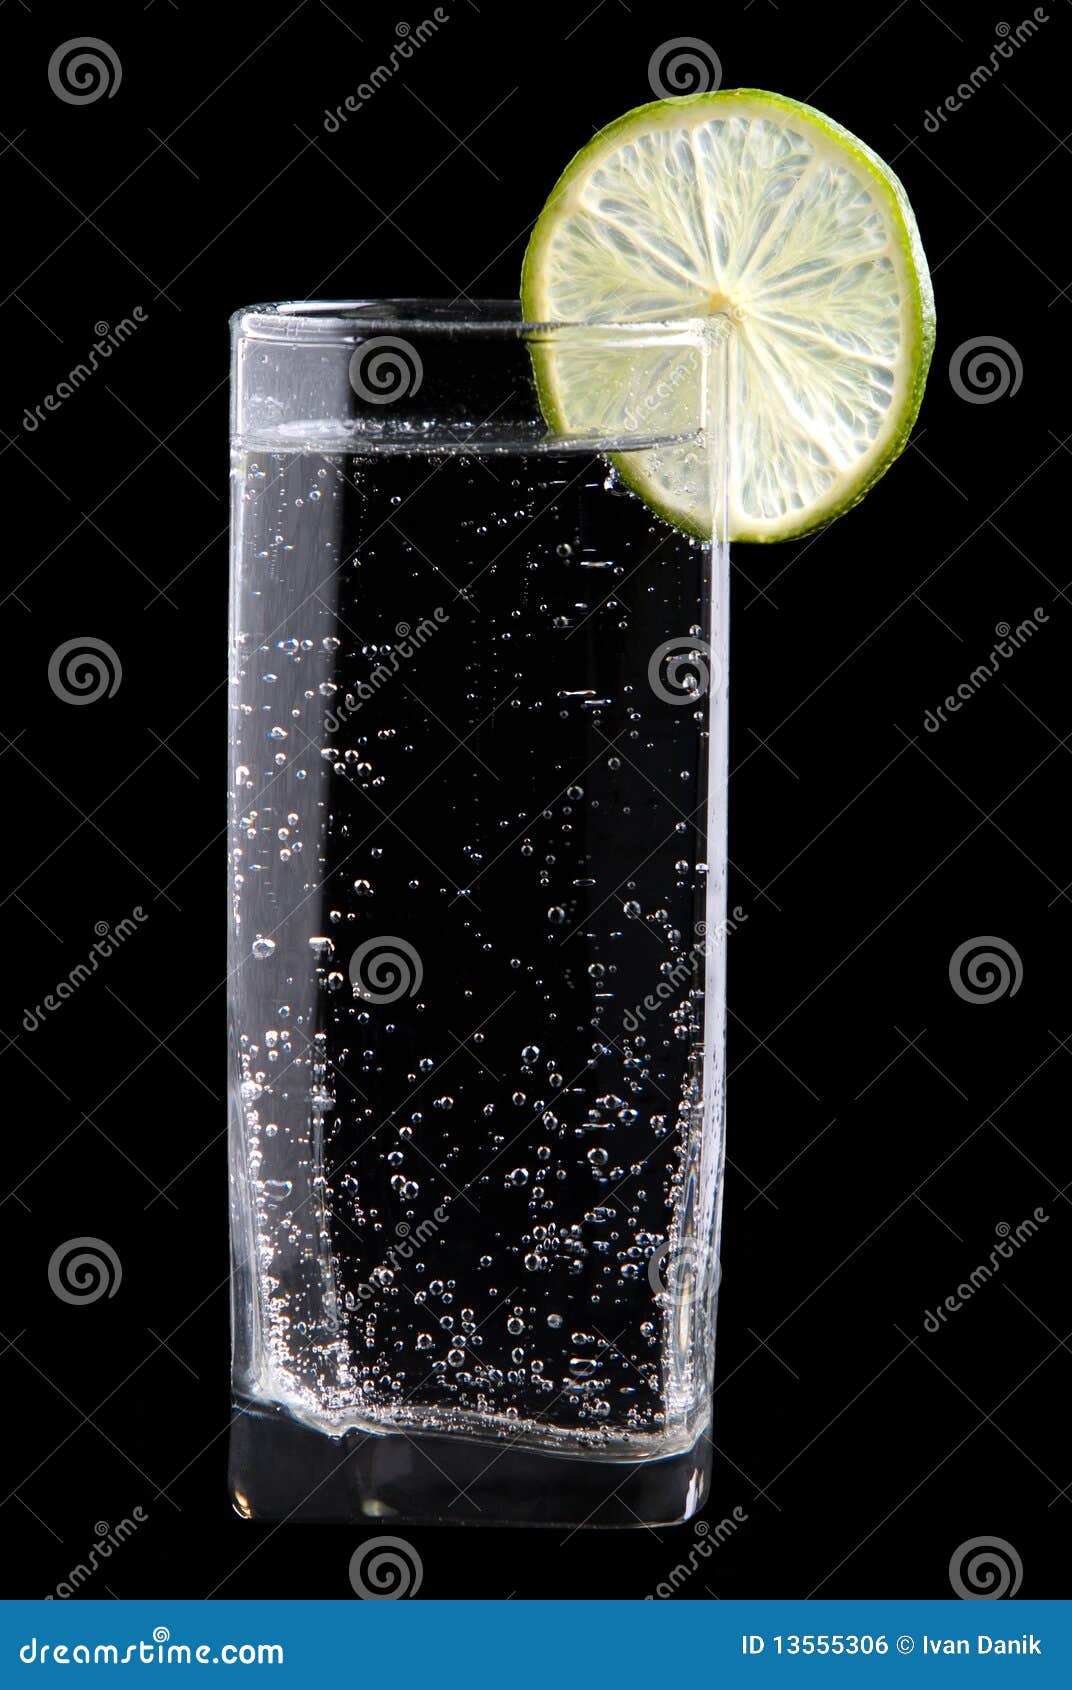 glass-sparkling-water-lime-13555306.jpg